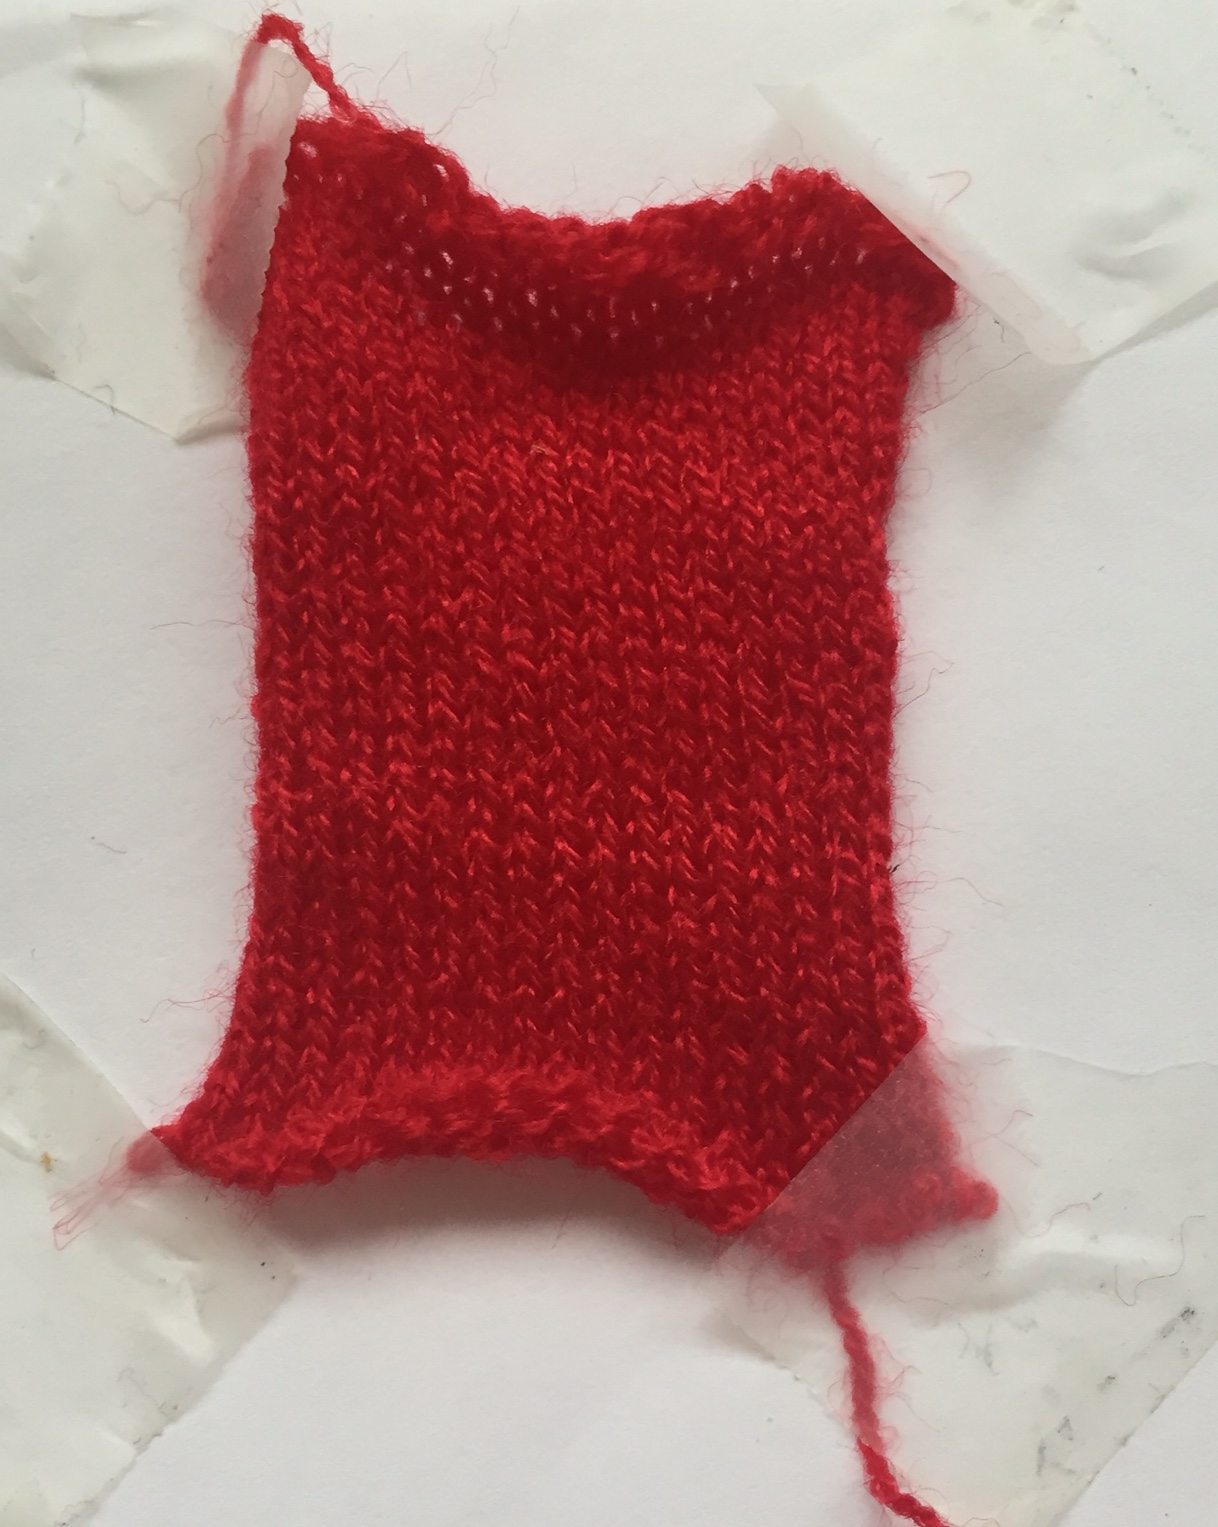 a recreation of my first swatch, and what the above knitout logic produces. alas, the original is lost to the sands of time…